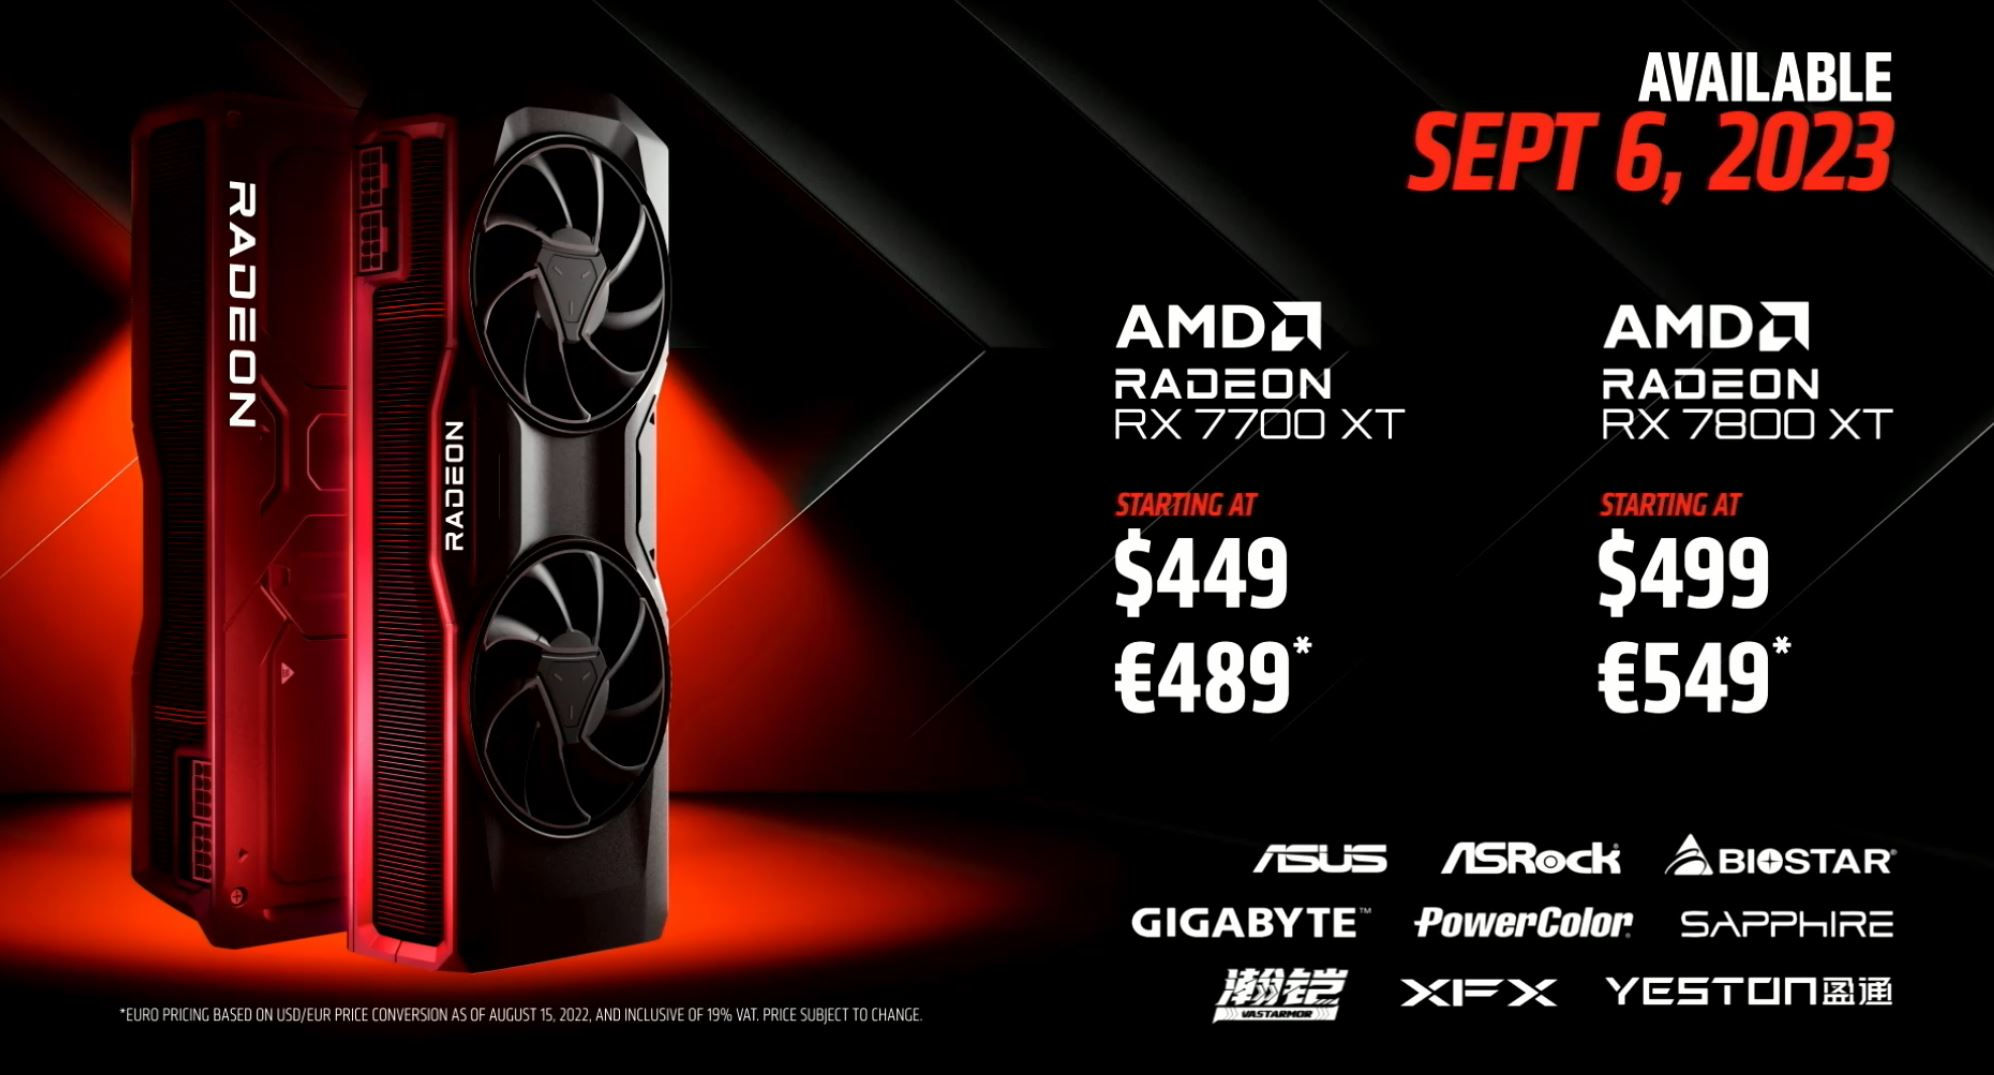 RX 7800 xt 7700 xt release and pricing